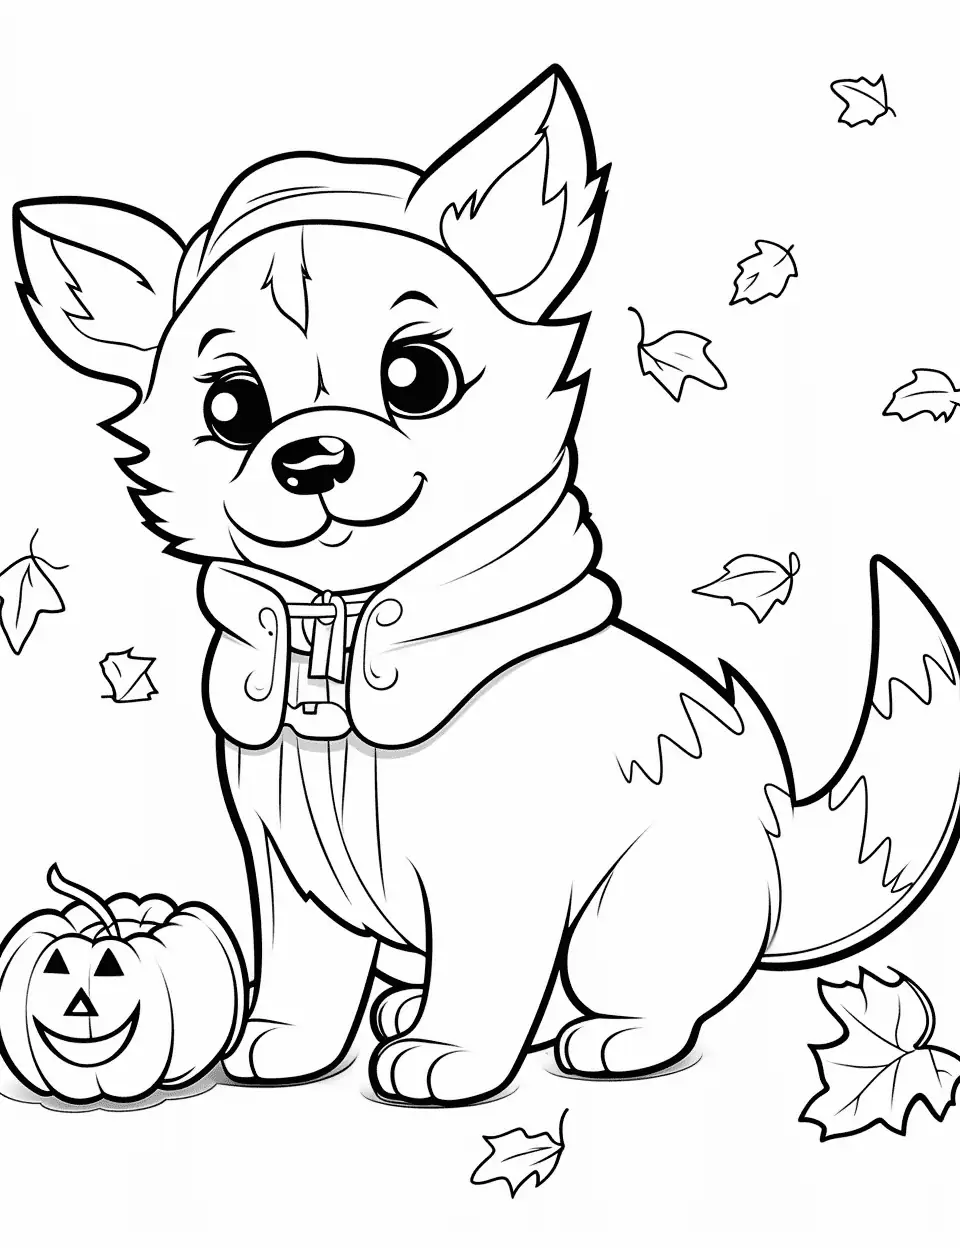 Dog in a Halloween Costume Coloring Page - A dog dressed up in a cute Halloween costume, surrounded by fallen autumn leaves.